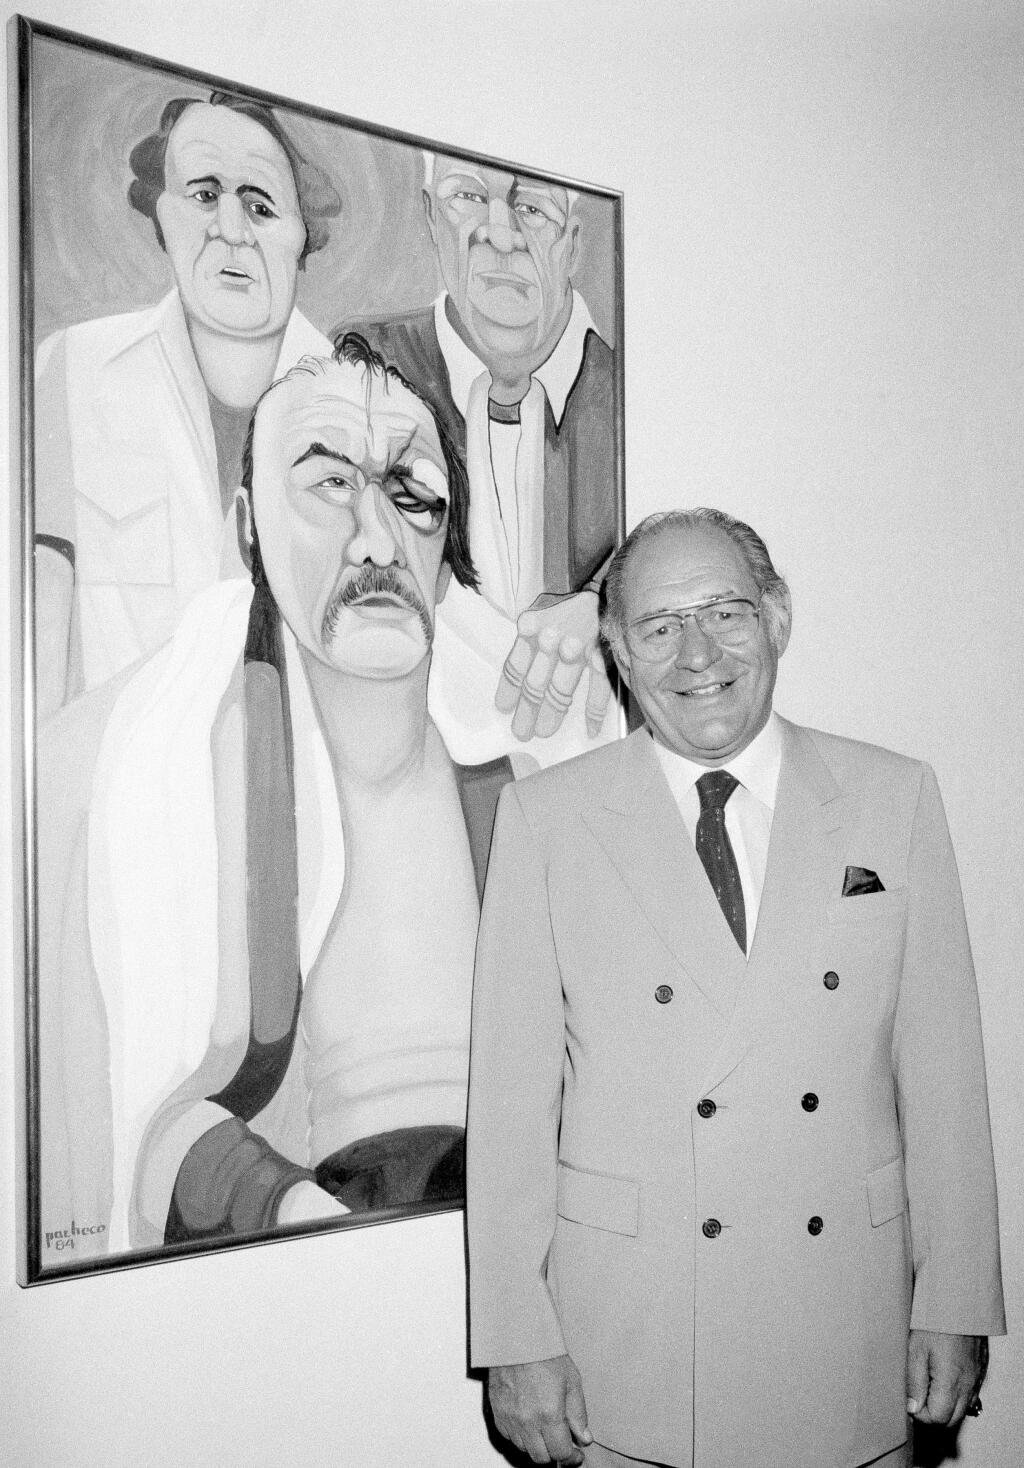 In this May 10, 1984, file photo, Ferdie Pacheco stands in front of his painting of boxer Chuck Wepner at Manhattan's Spectrum Fine Art Gallery in New York. Fernando “Ferdie” Pacheco, “The Fight Doctor” who served as Muhammad Ali's ringside physician, died Thursday morning, Nov. 16, 2017, at his Miami home after prolonged illness, his daughter, Tina Louise Pacheco, said. He was 89. (AP Photo/Lance Jeffrey)